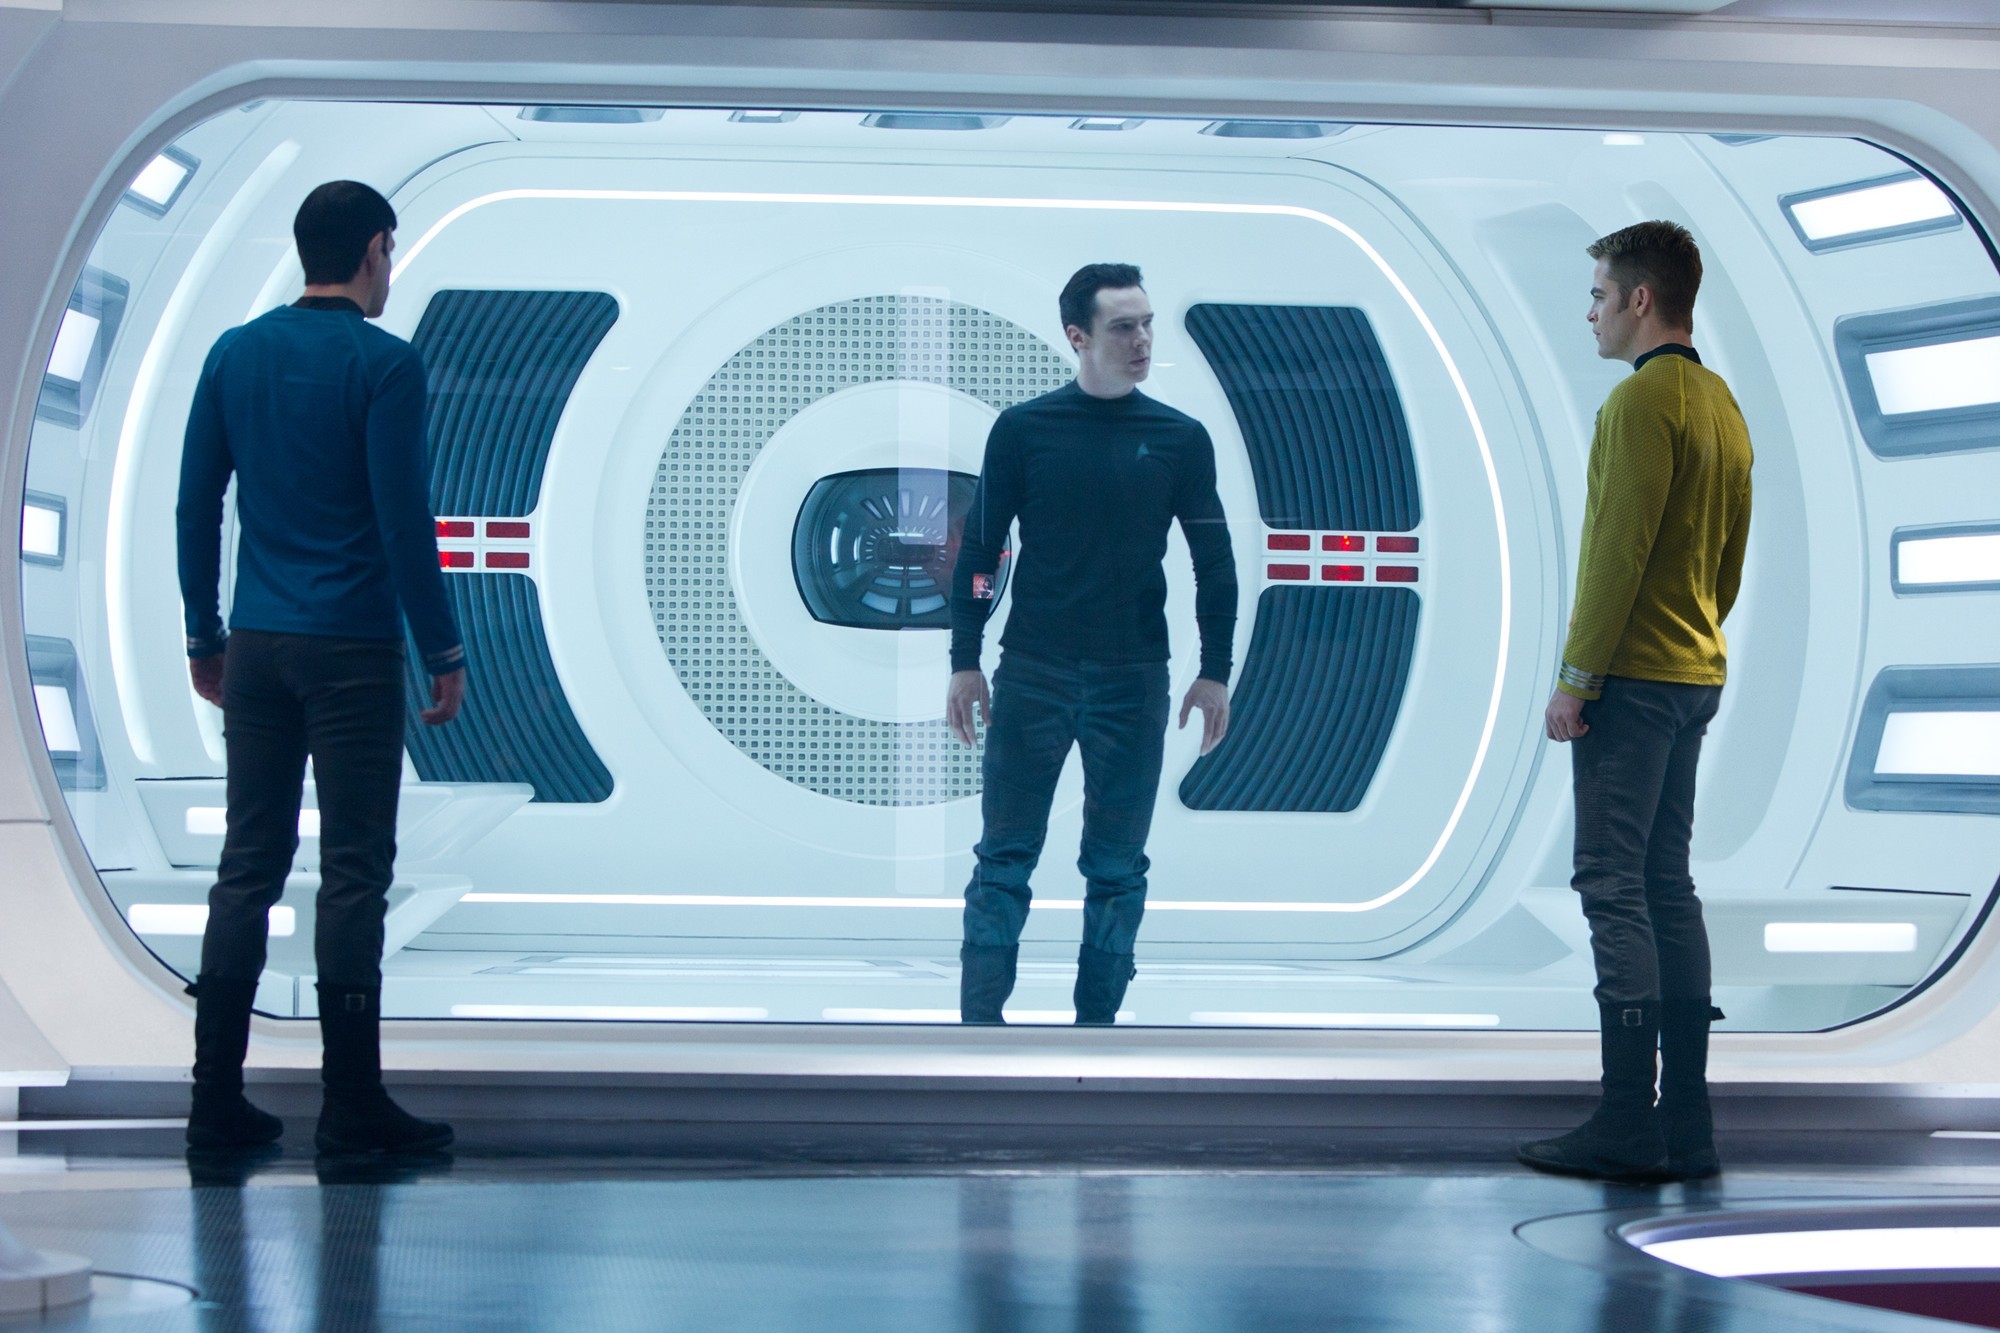 Zachary Quinto, Benedict Cumberbatch and Chris Pine in Paramount Pictures' Star Trek Into Darkness (2013)